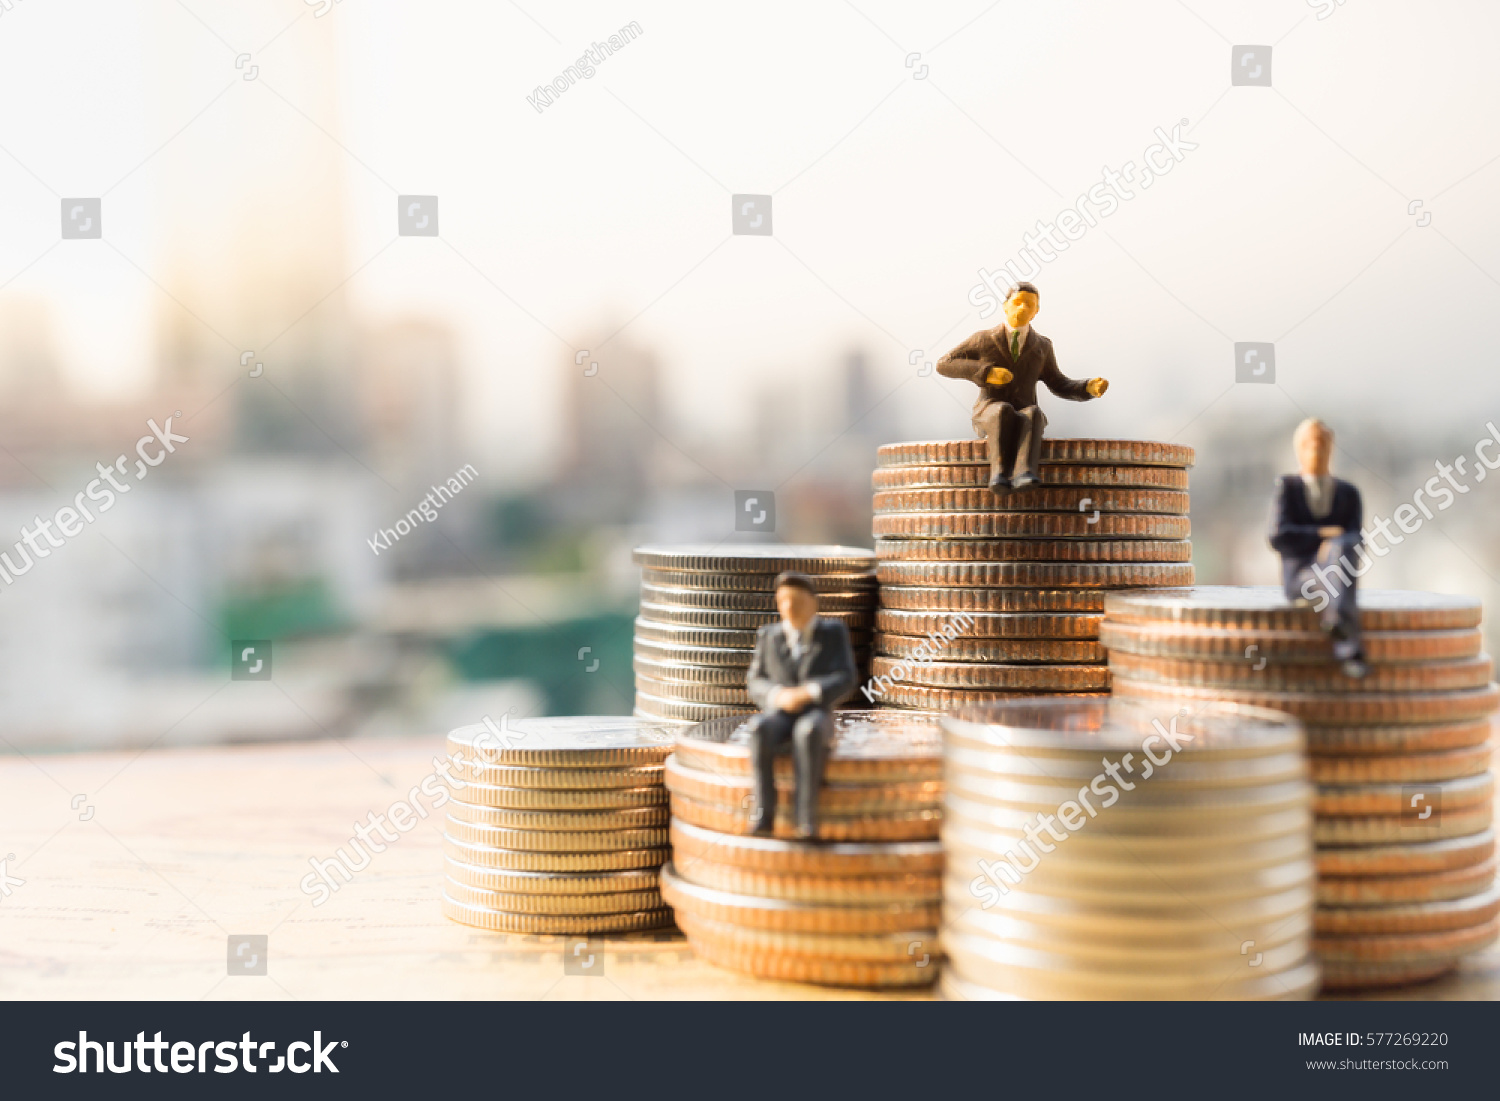 Miniature people: Small businessmen sitting on stack of coins, Money, Financial, Business Growth concept. #577269220